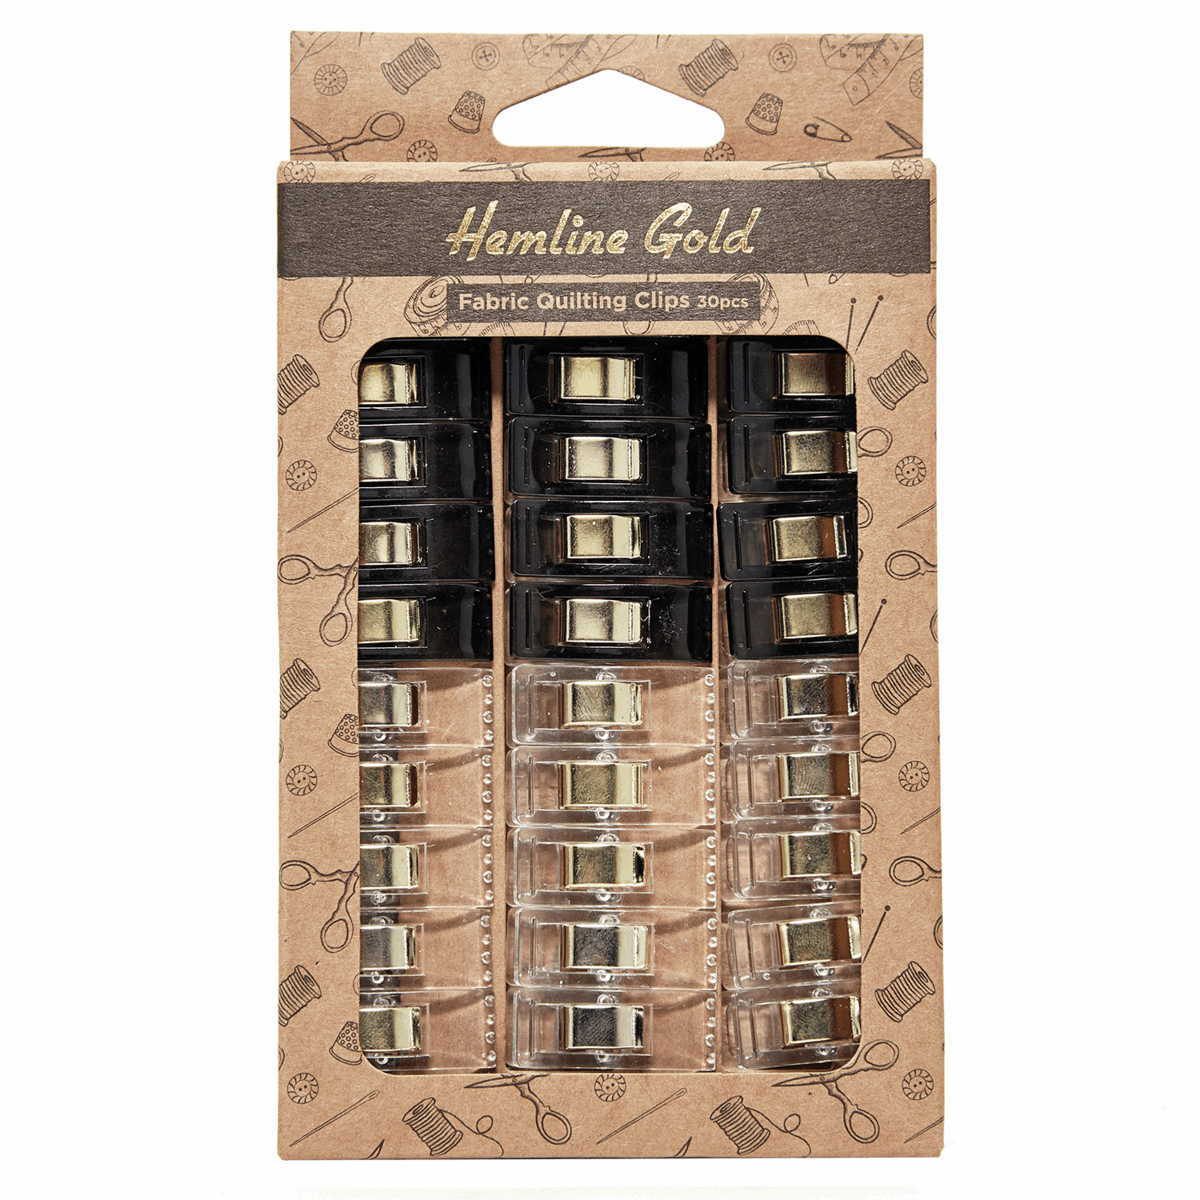 30 pack Hemline Gold wonder clips /quilt clips 25 mm for sewing or crafting.